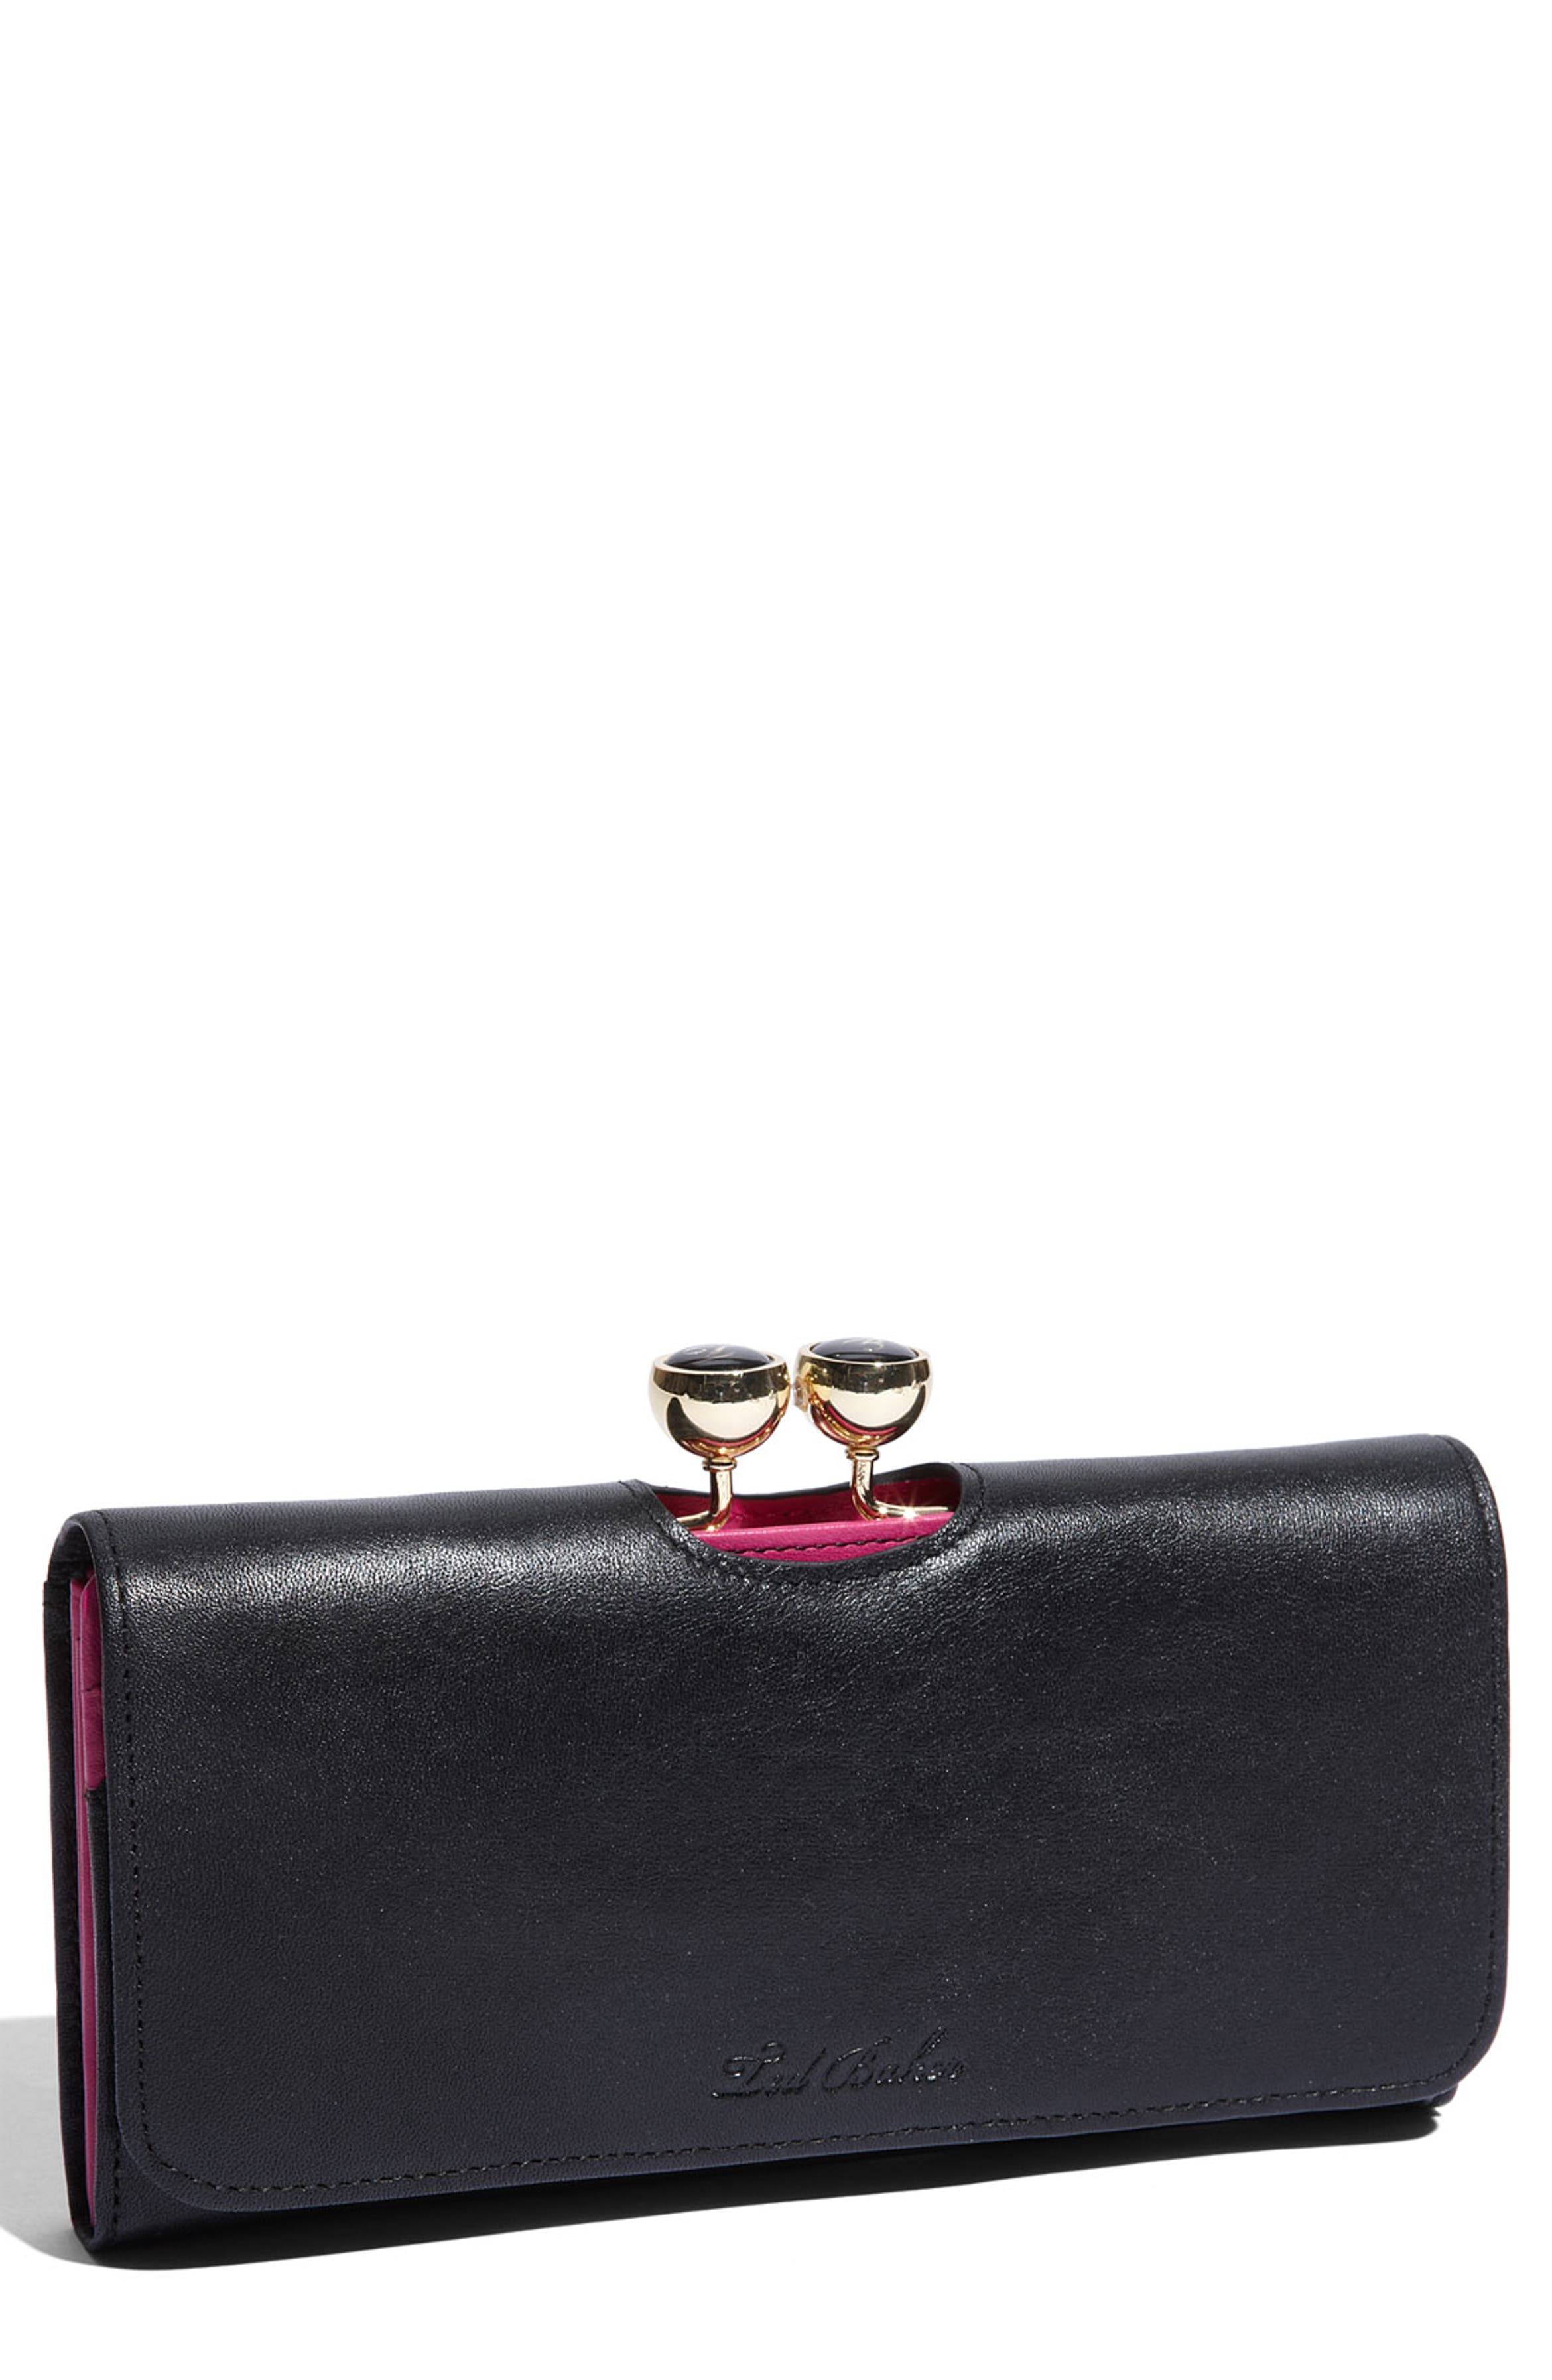 Ted Baker London 'Bobble' Leather Matinee Wallet | Nordstrom